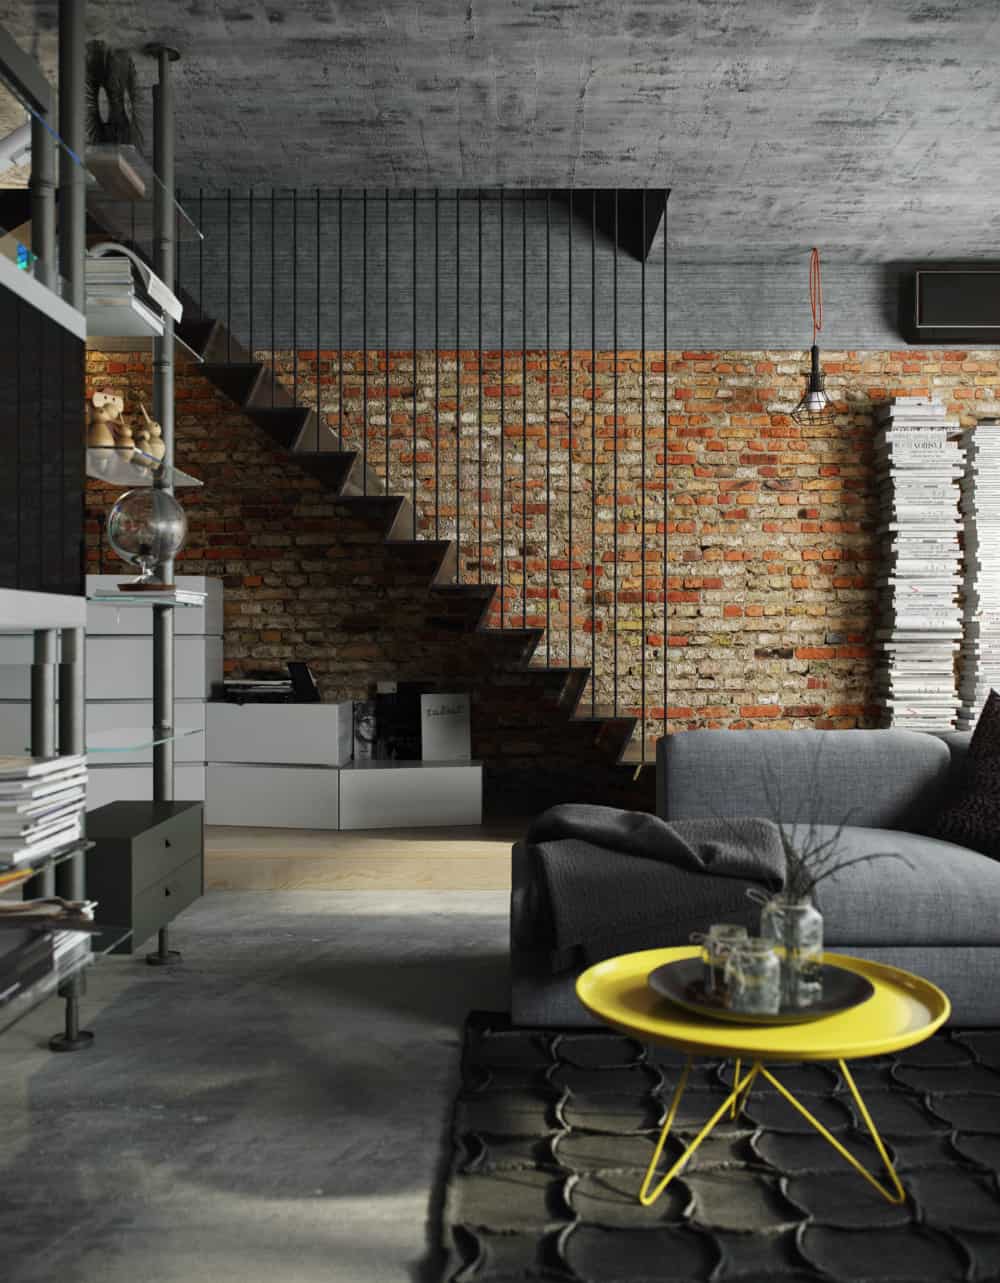 Concrete ceiling and exposed brick wall